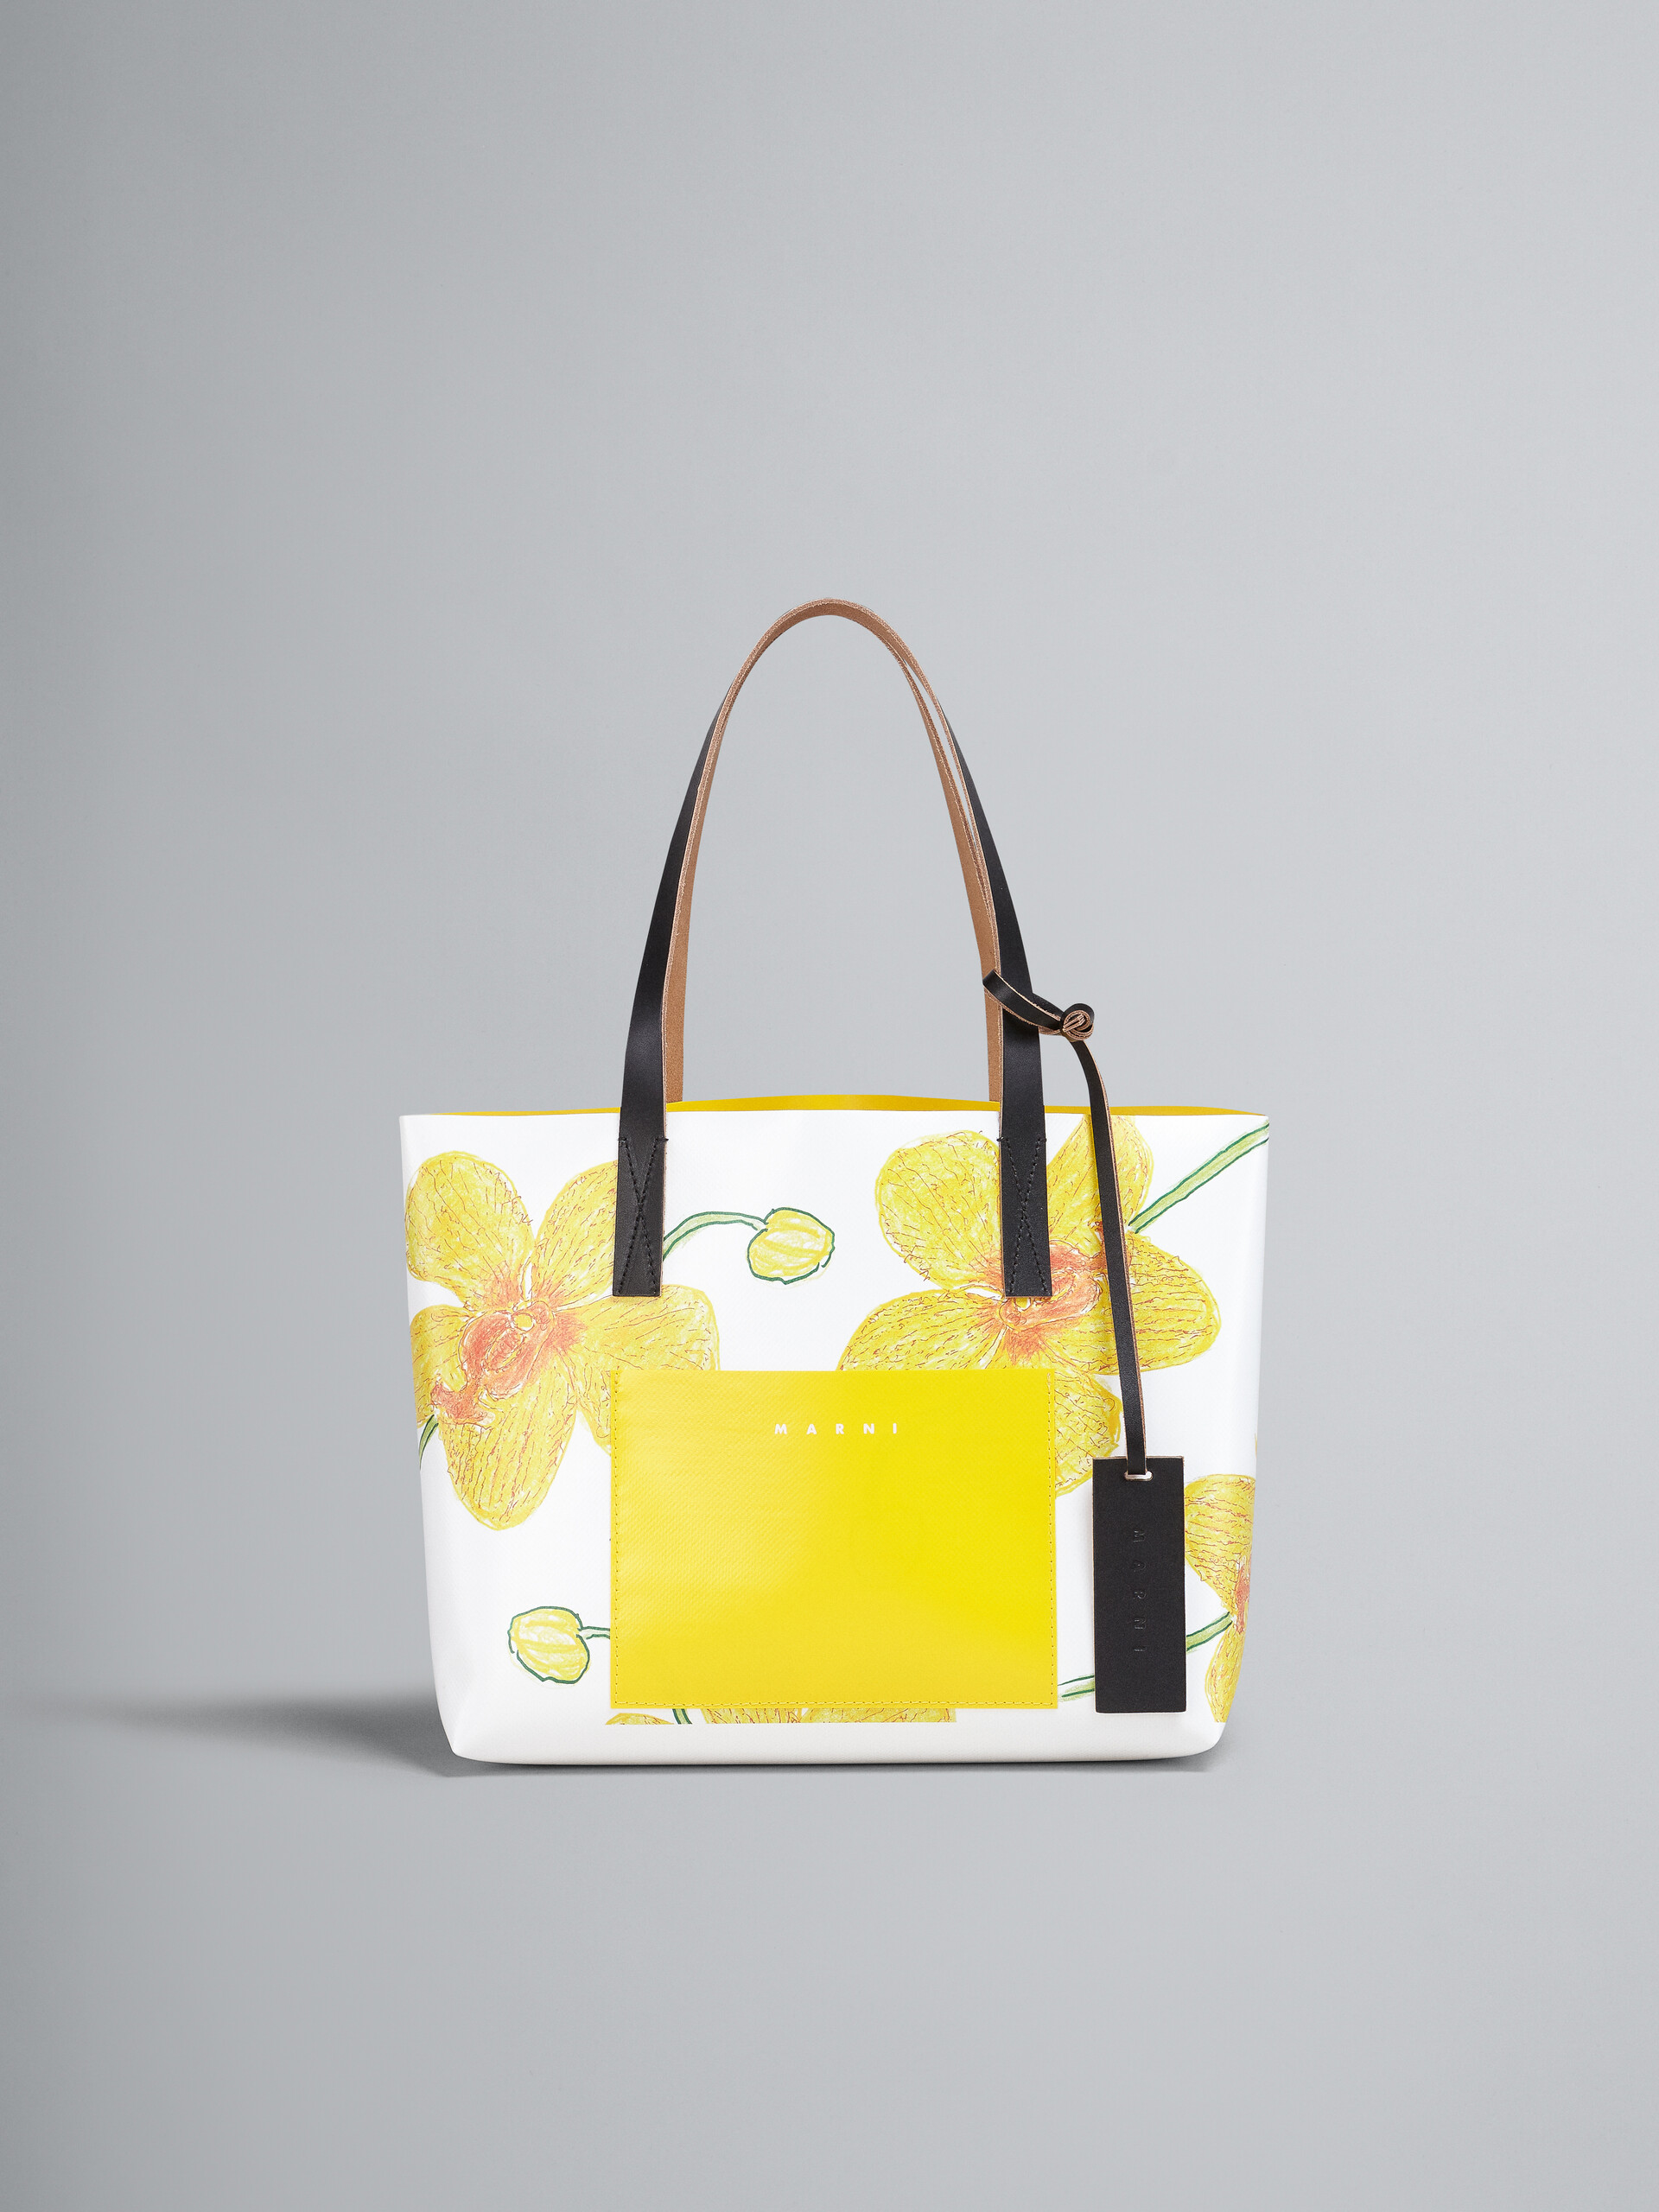 Orchids print yellow shopping bag - Shopping Bags - Image 1